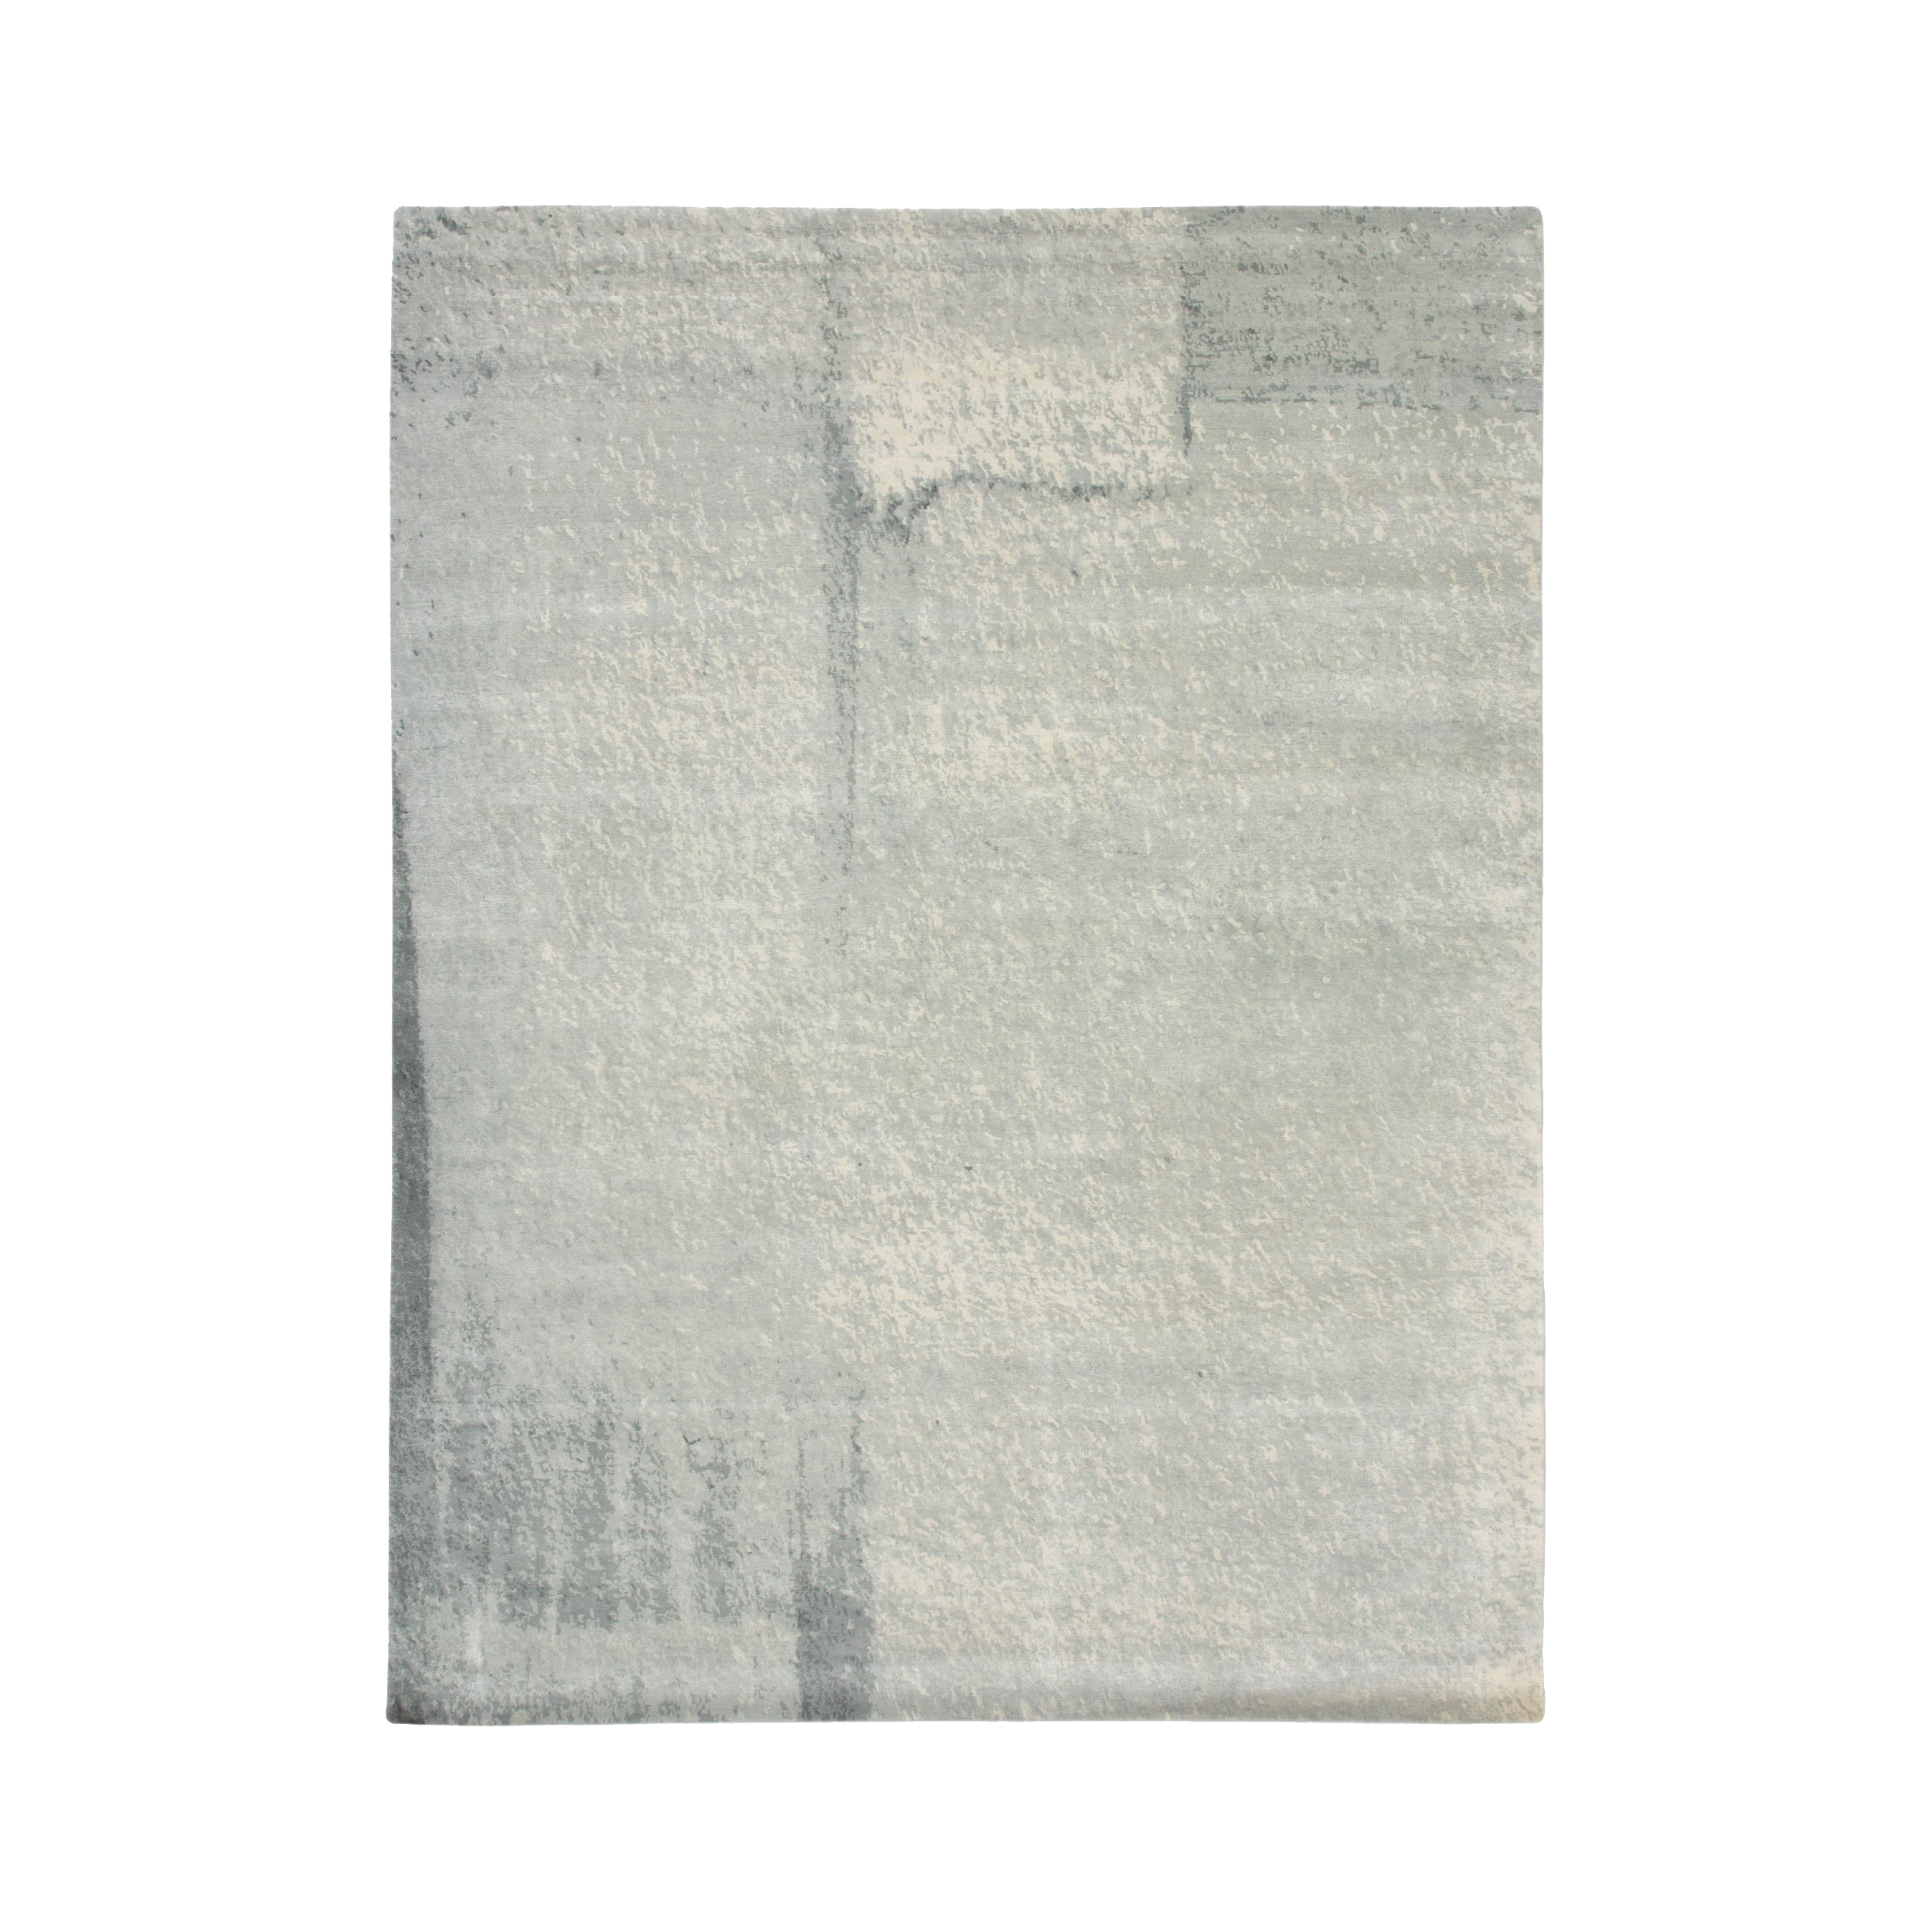 Morro rug, inspired by Mark Rothko and his colour field paintings, is a contemporary design of neutral tones. 